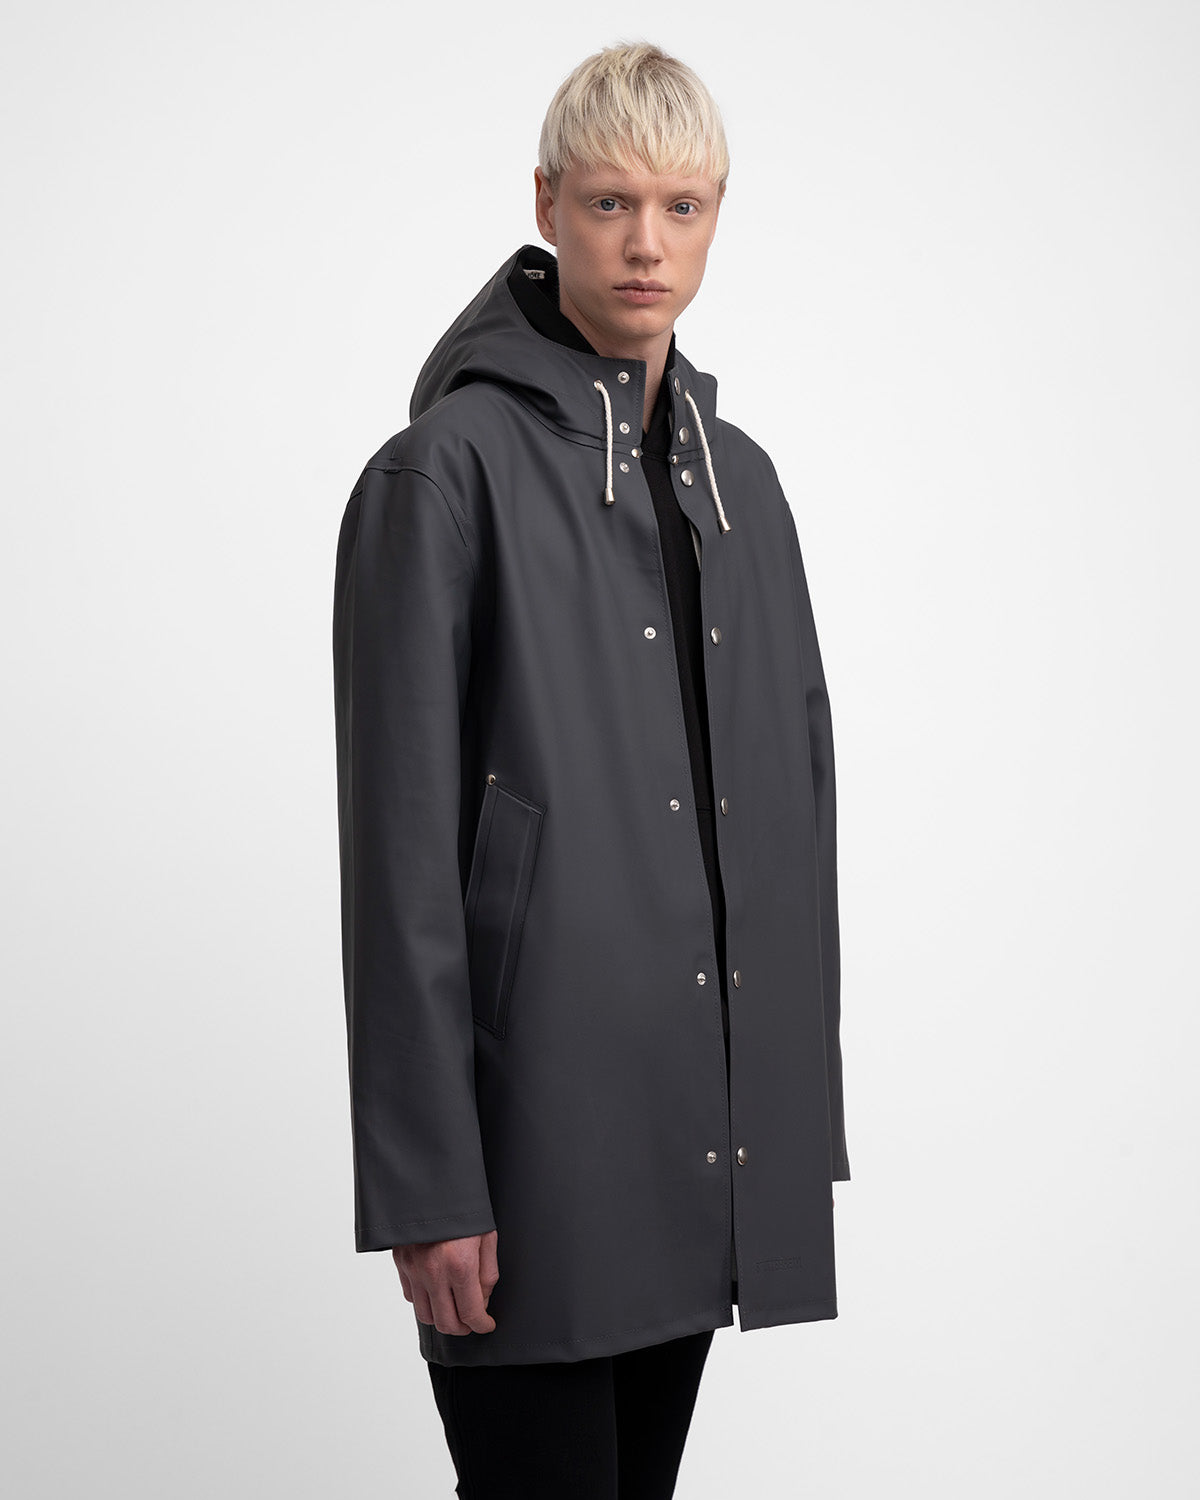 A man with a Raincoat in color charcoal by Stutterheim